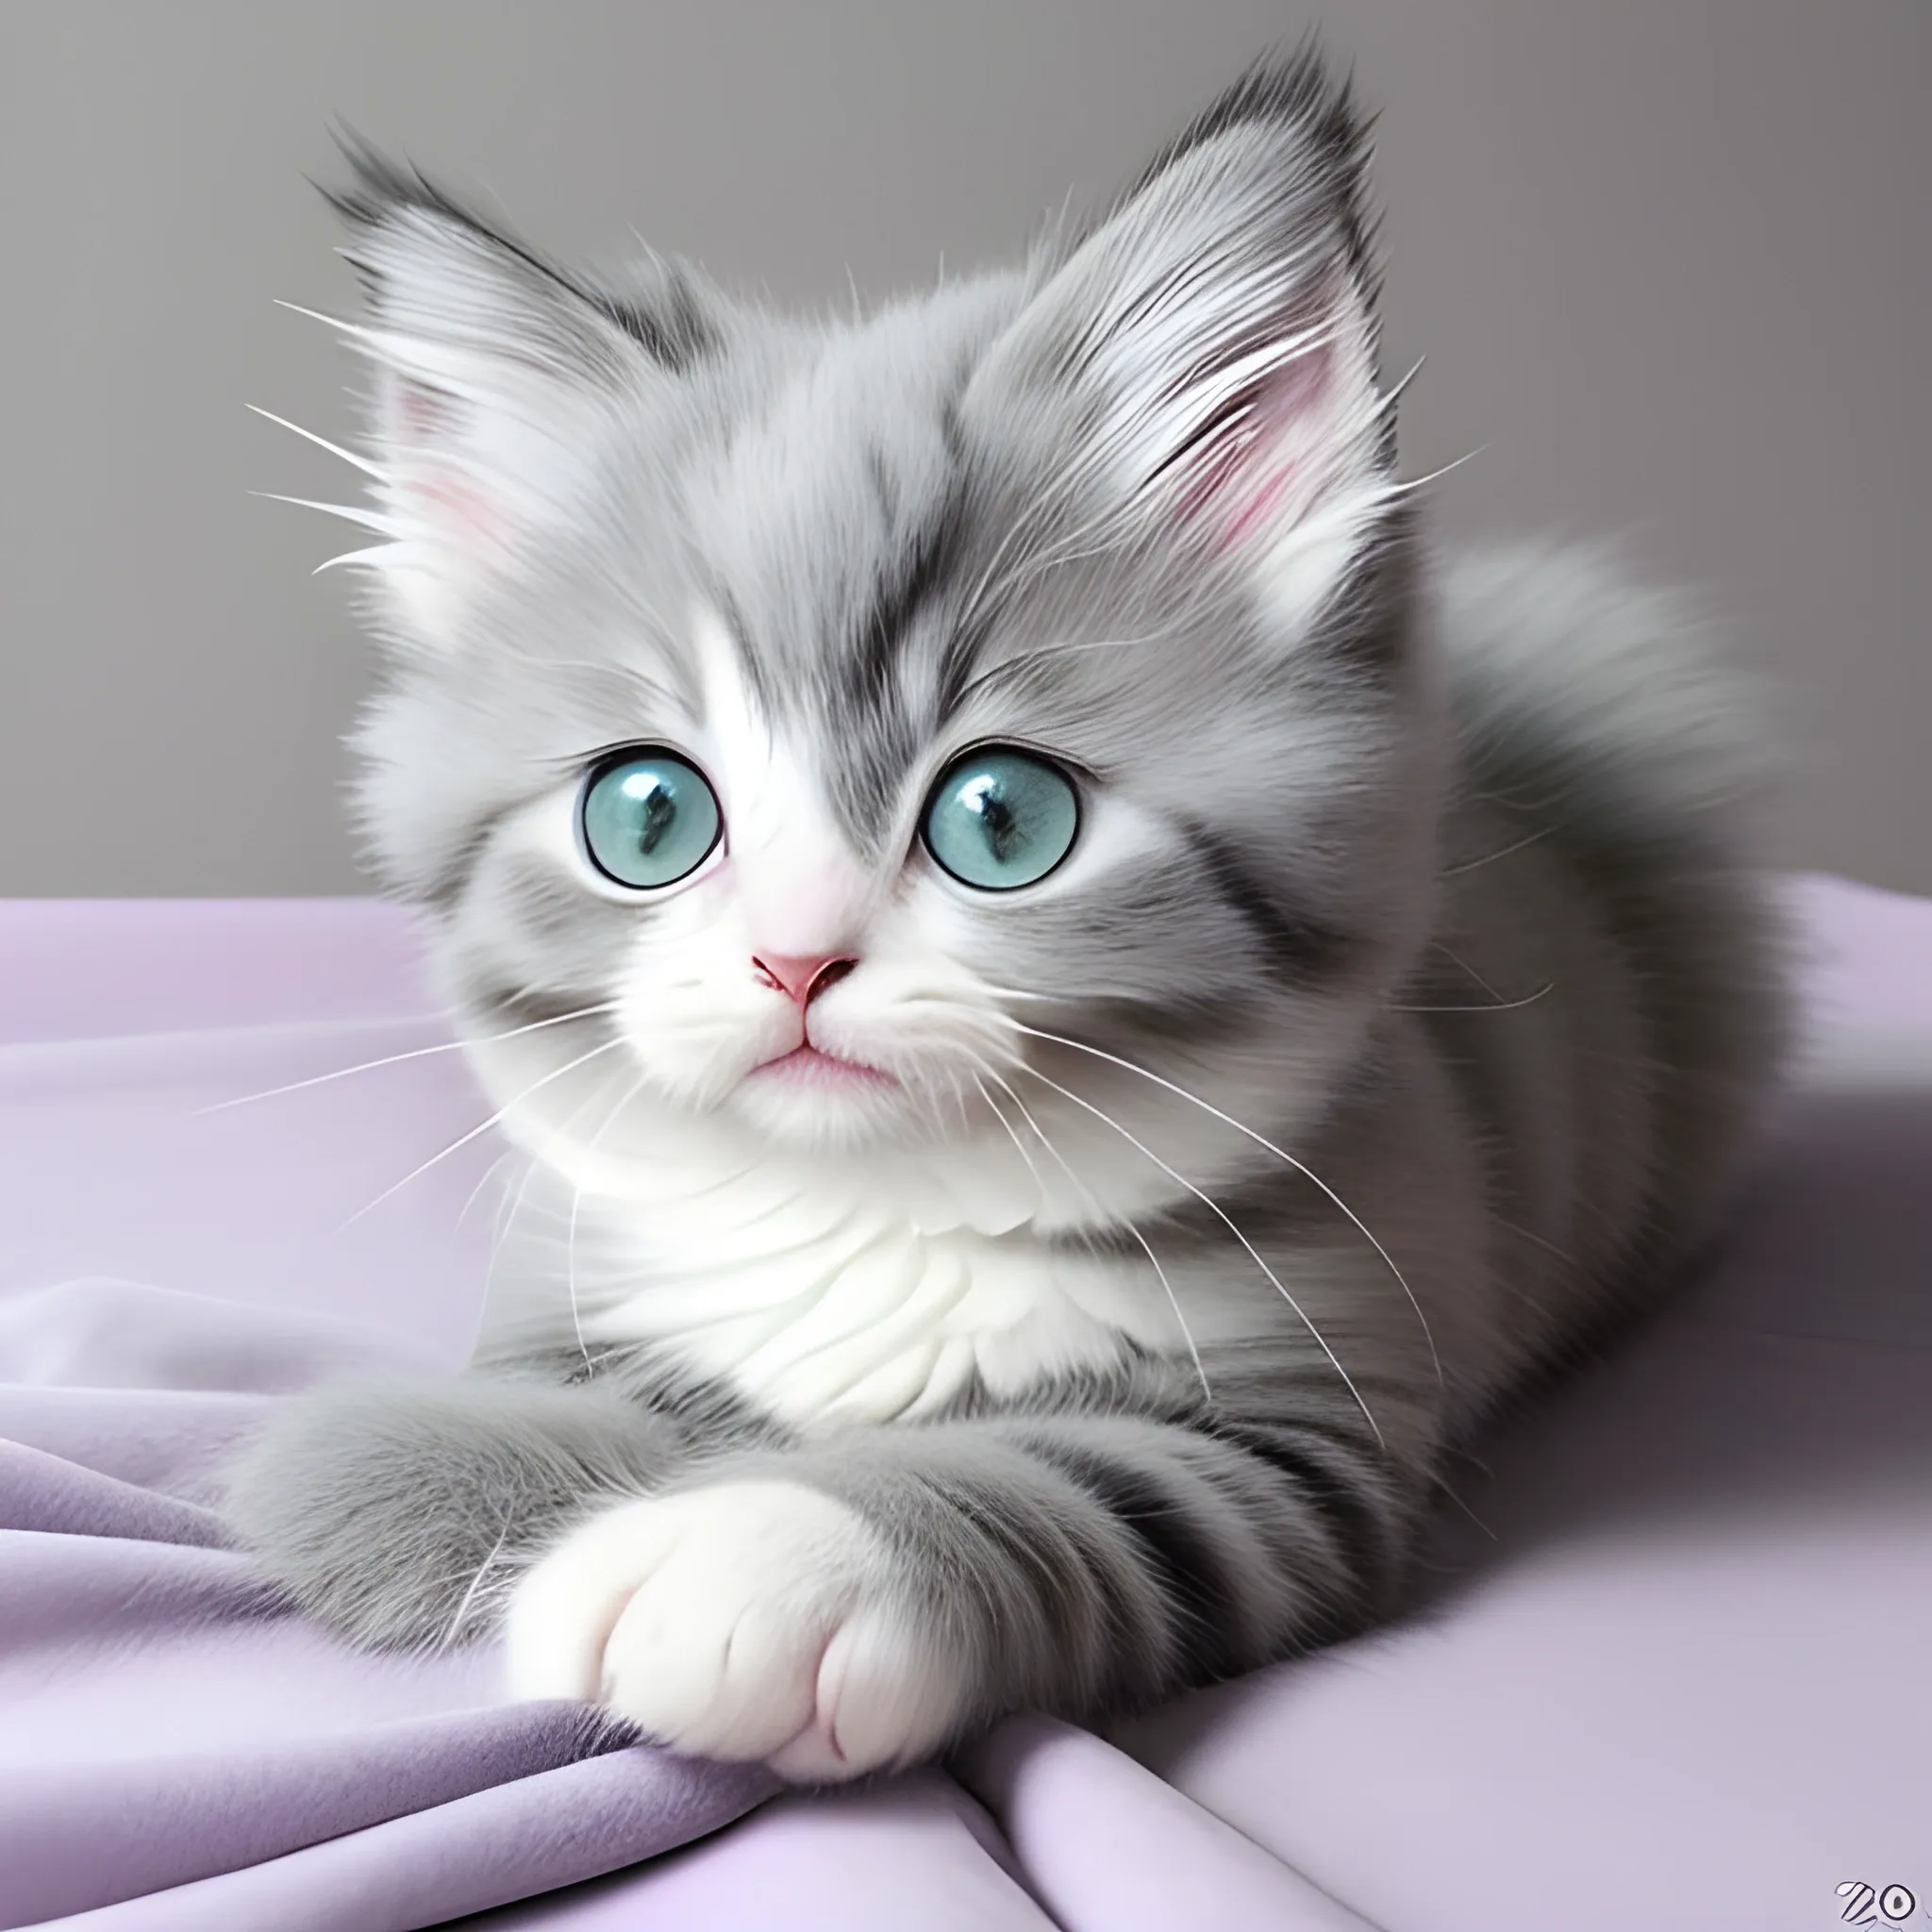 


The image features a fluffy, gray-and-white kitten with big, round eyes and delicate pink ears. The kitten is sitting on a soft, knitted blanket, its tiny paws tucked neatly under its body. Its whiskers are twitching with curiosity as it gazes intently at something just out of frame. The kitten's fur is so soft and plush that you can almost feel the texture through the screen. With a playful tilt of its head and a sweet, innocent expression, this adorable cat is sure to melt the hearts of anyone who sees it.





, 3D